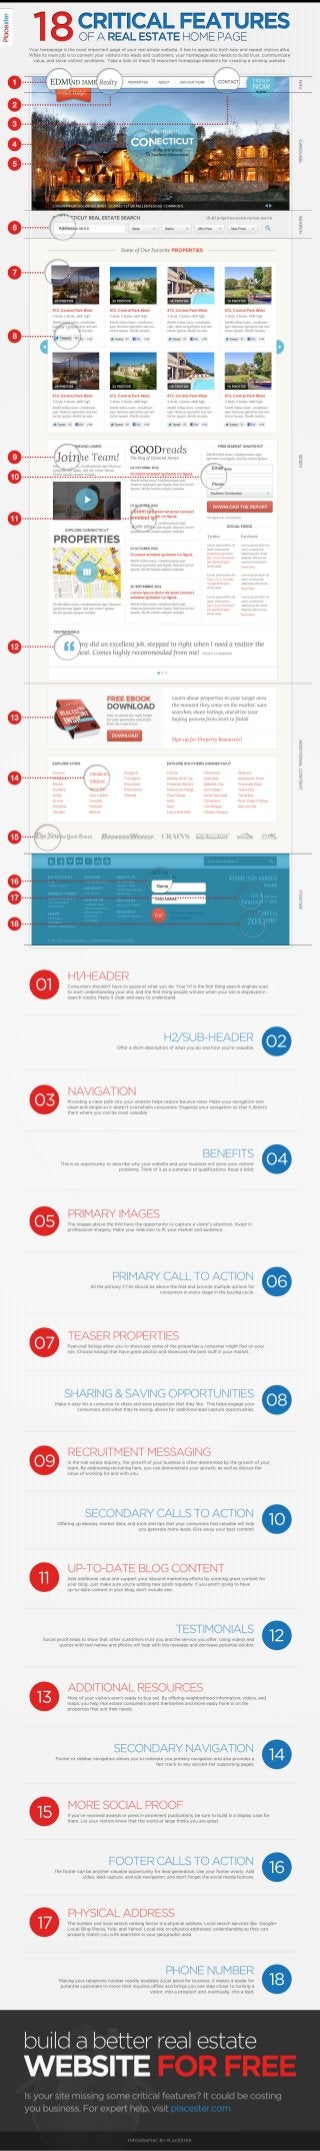 [Infographic] Anatomy of a Real Estate Marketing Website